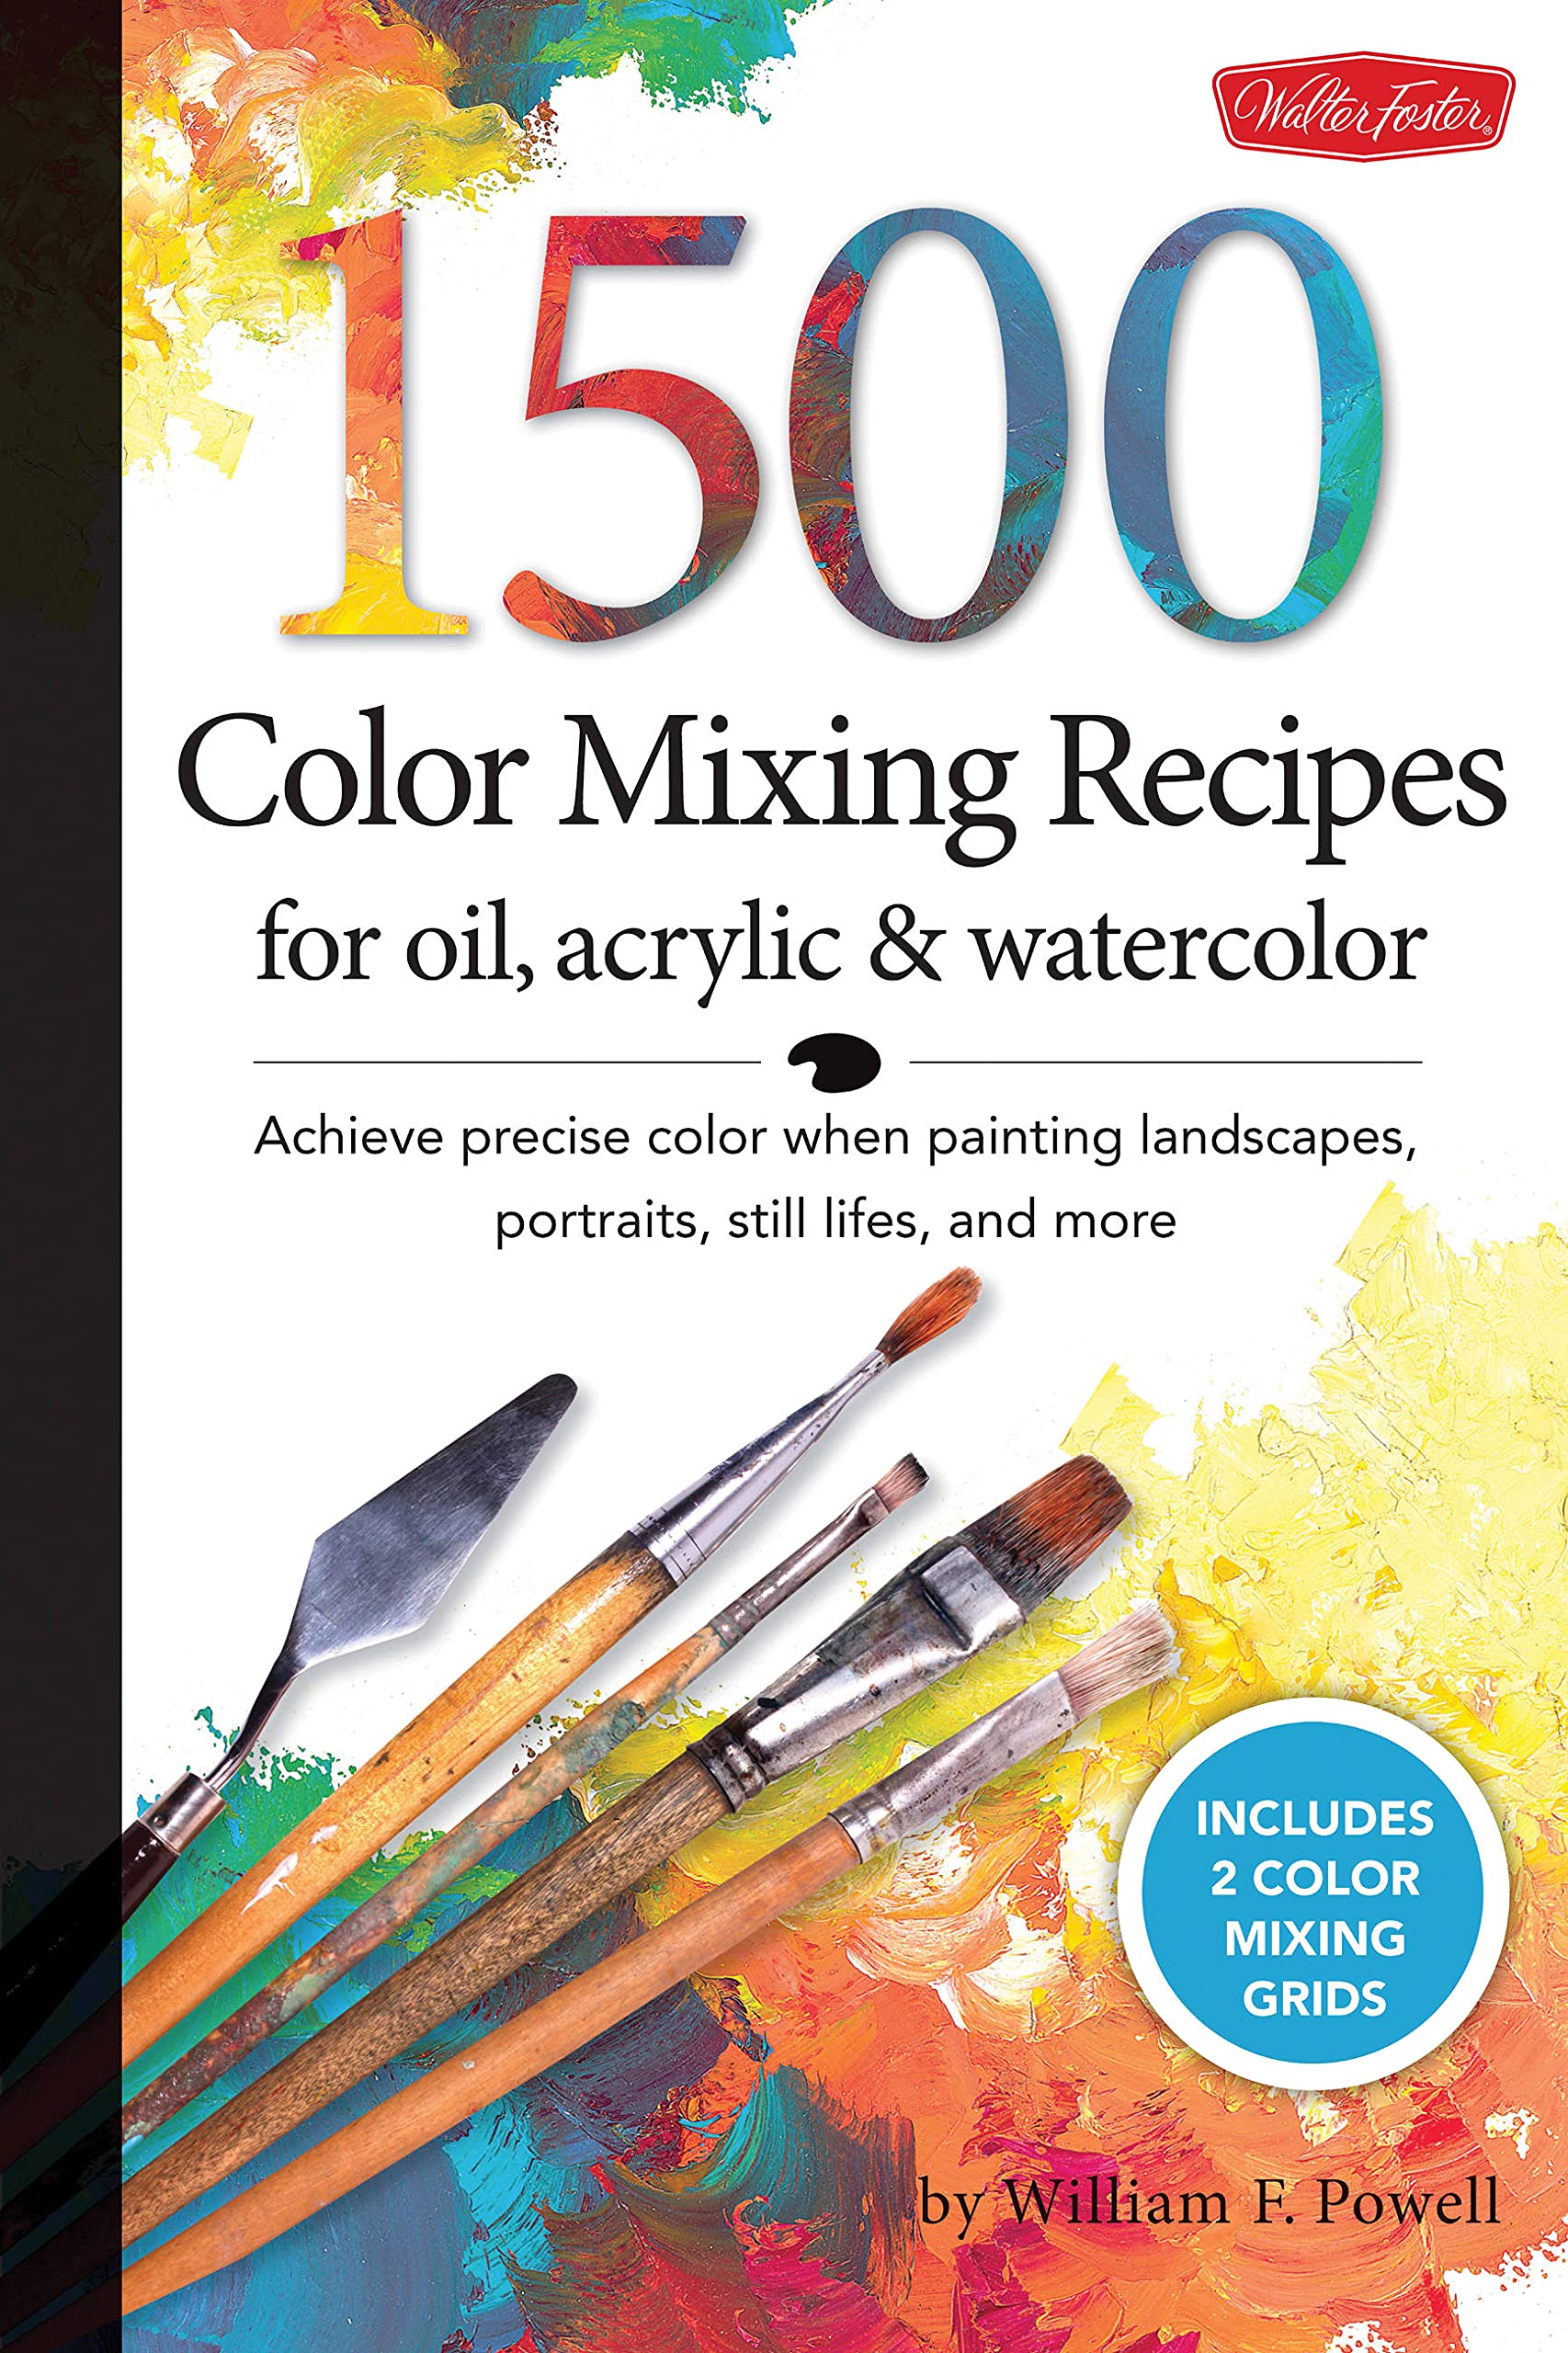 1,500 Color Mixing Recipes for Oil, Acrylic & Watercolor | William F. Powell